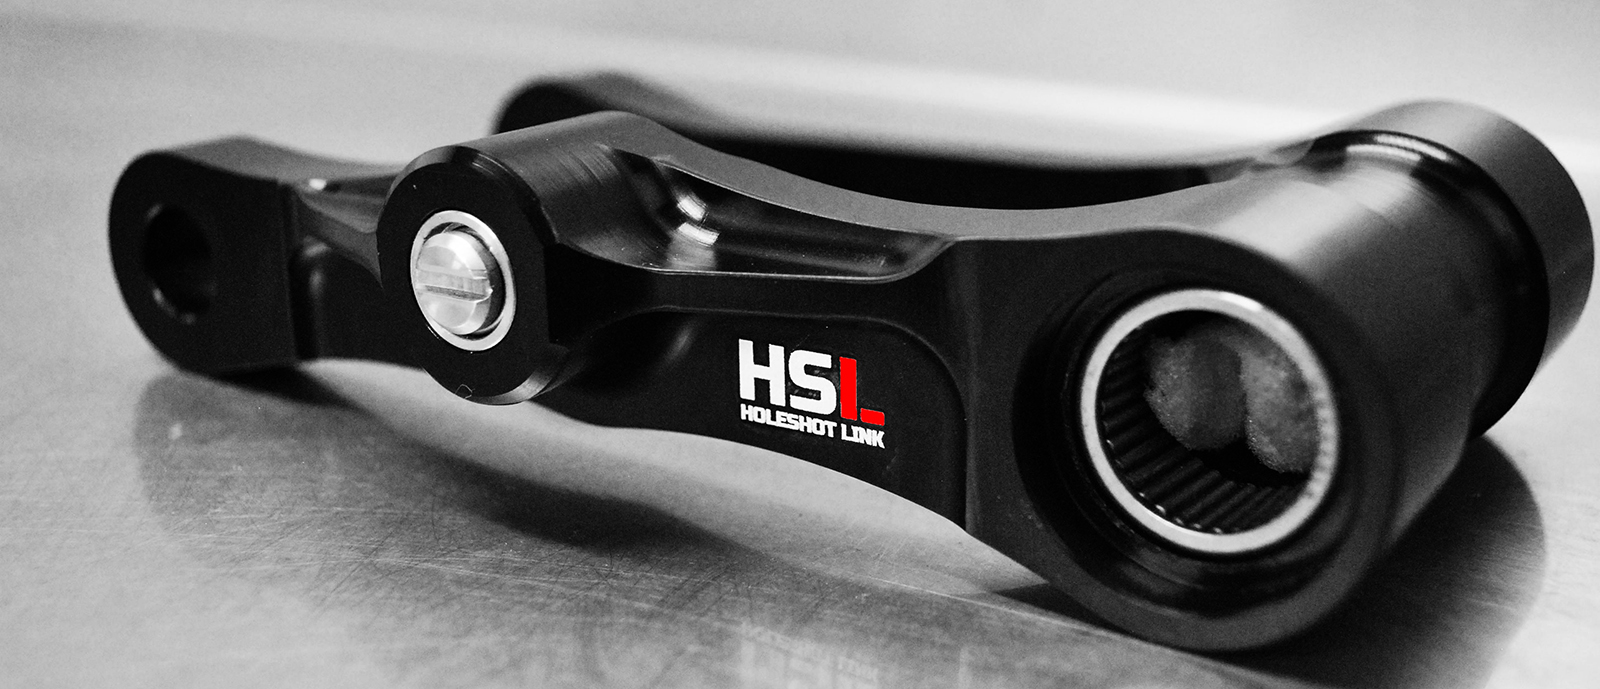 ORDER YOUR HSL NOW !